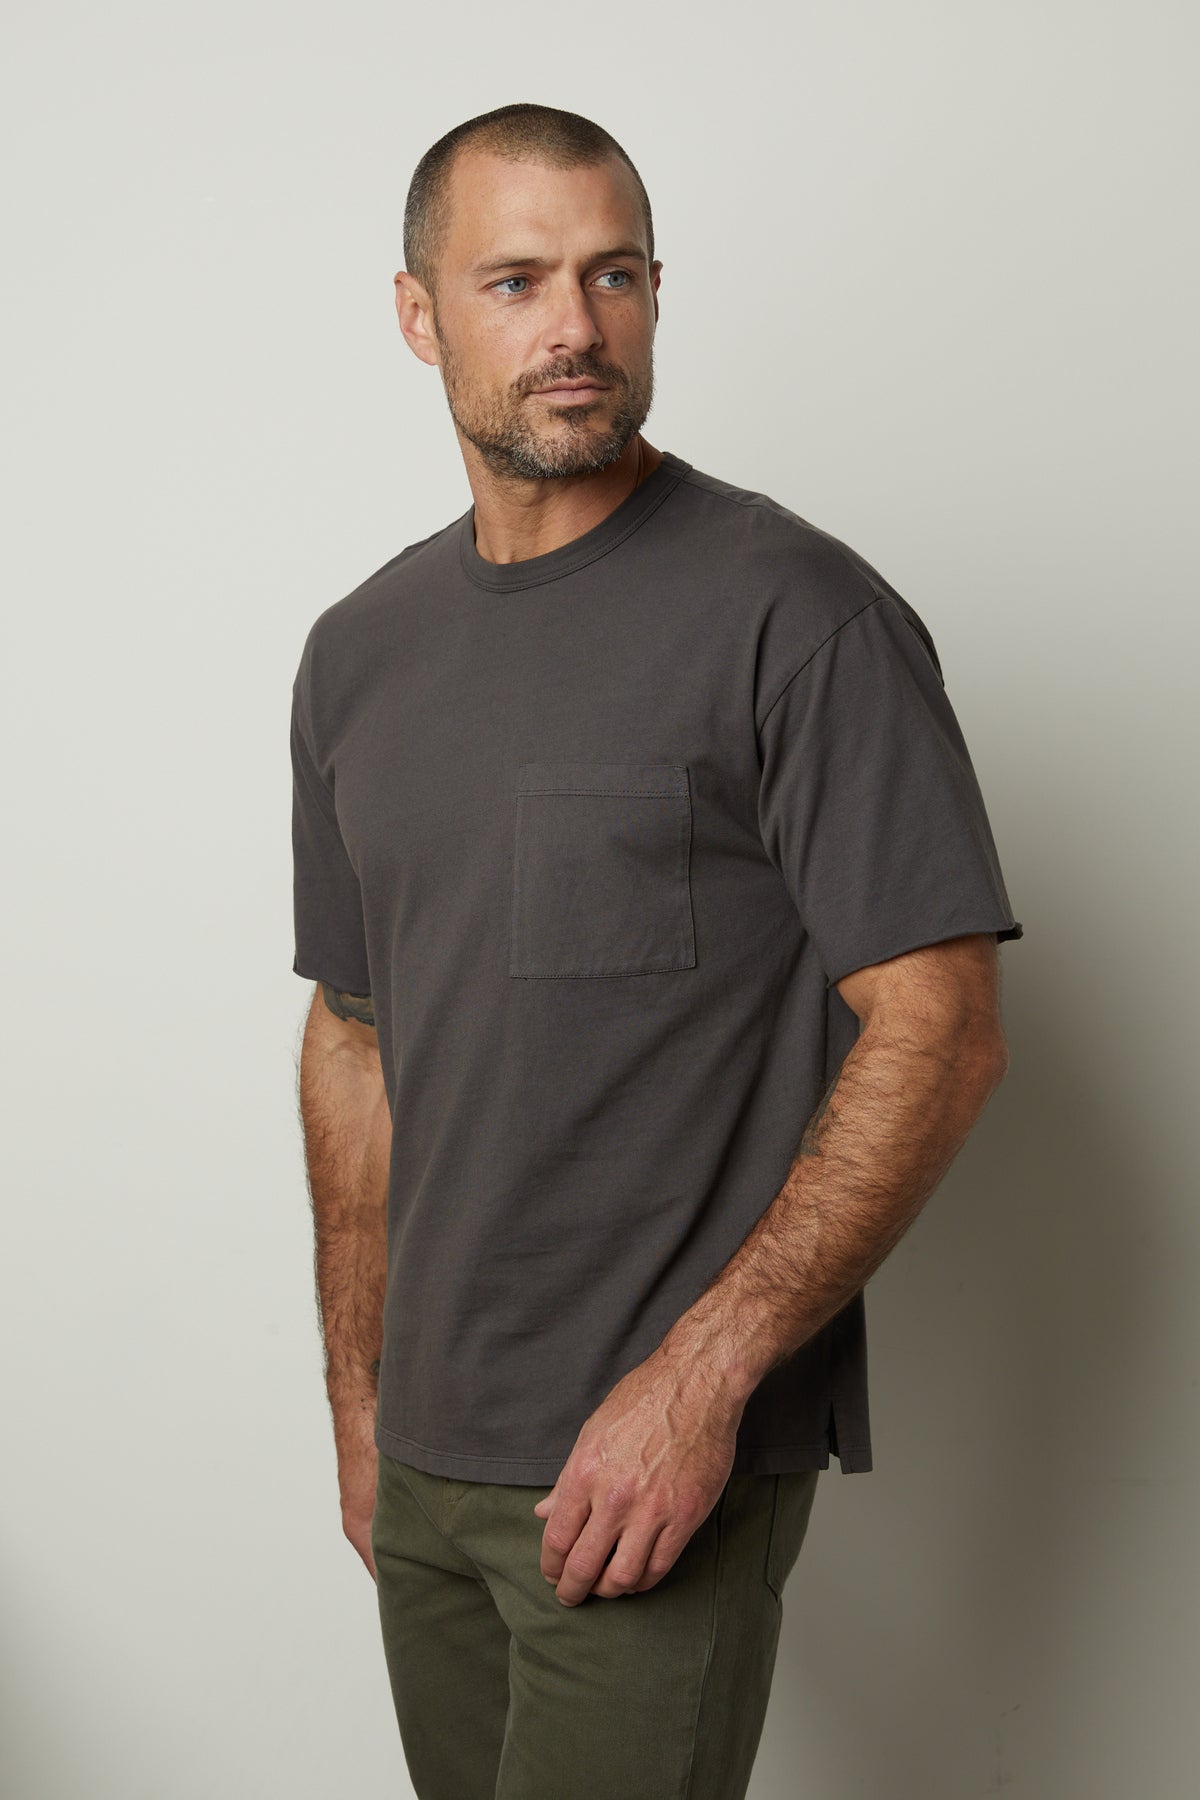 A man wearing a NEPTUNE CREW NECK POCKET TEE by Velvet by Graham & Spencer and green pants.-26827673043137